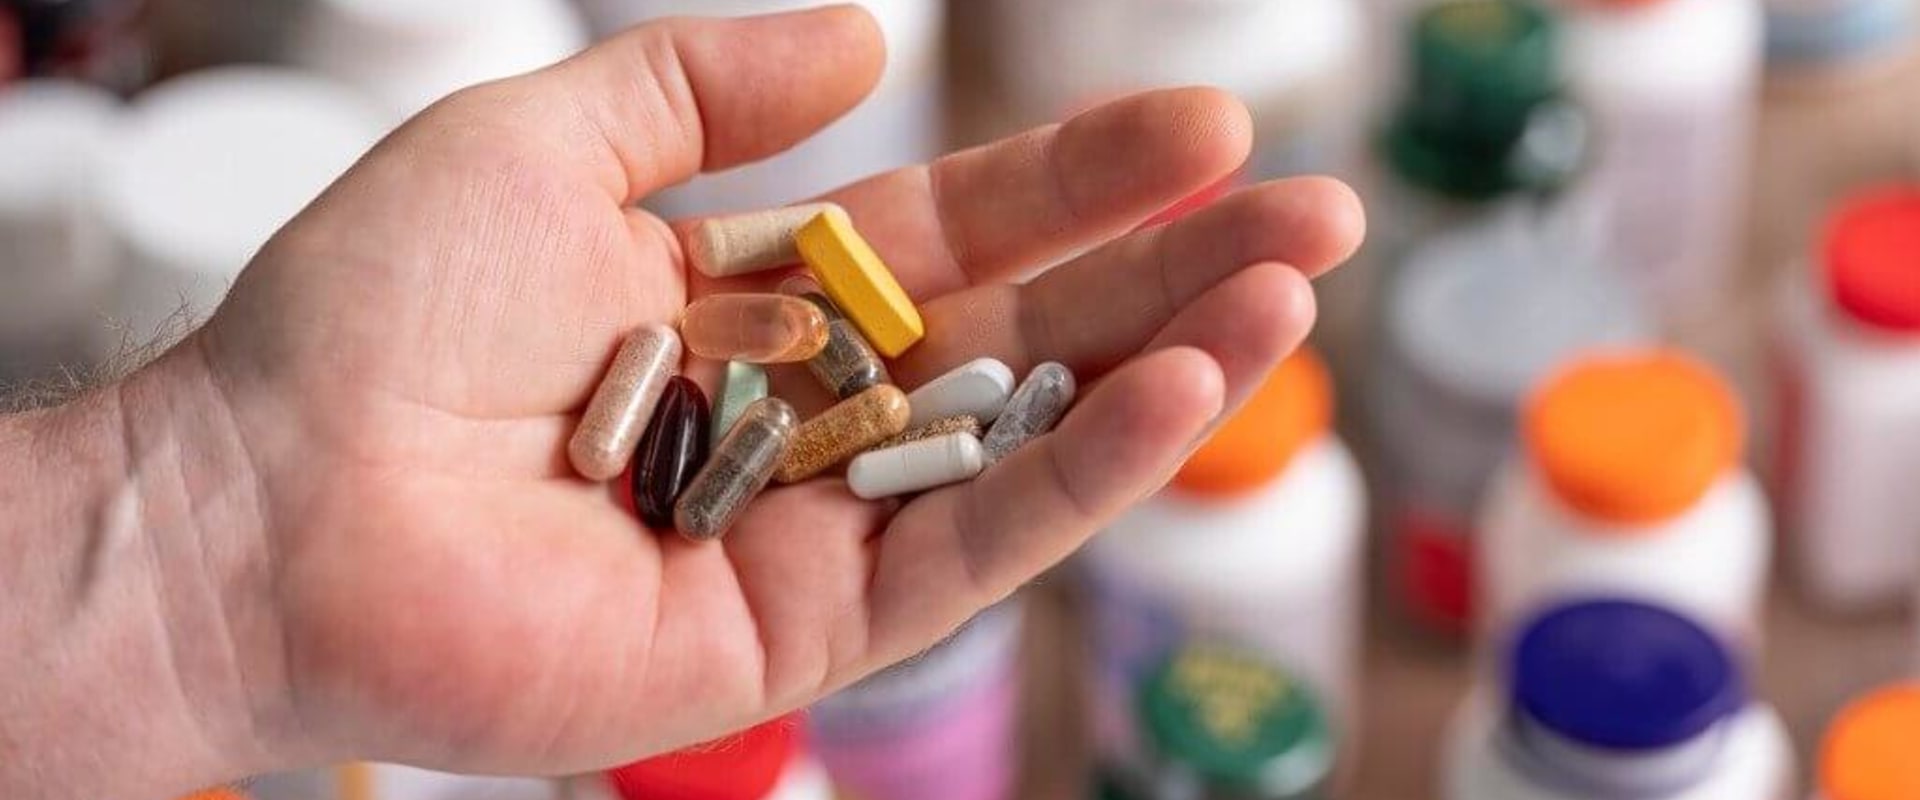 Do I Need Additional Vitamin D if I'm Taking Dietary Supplements?